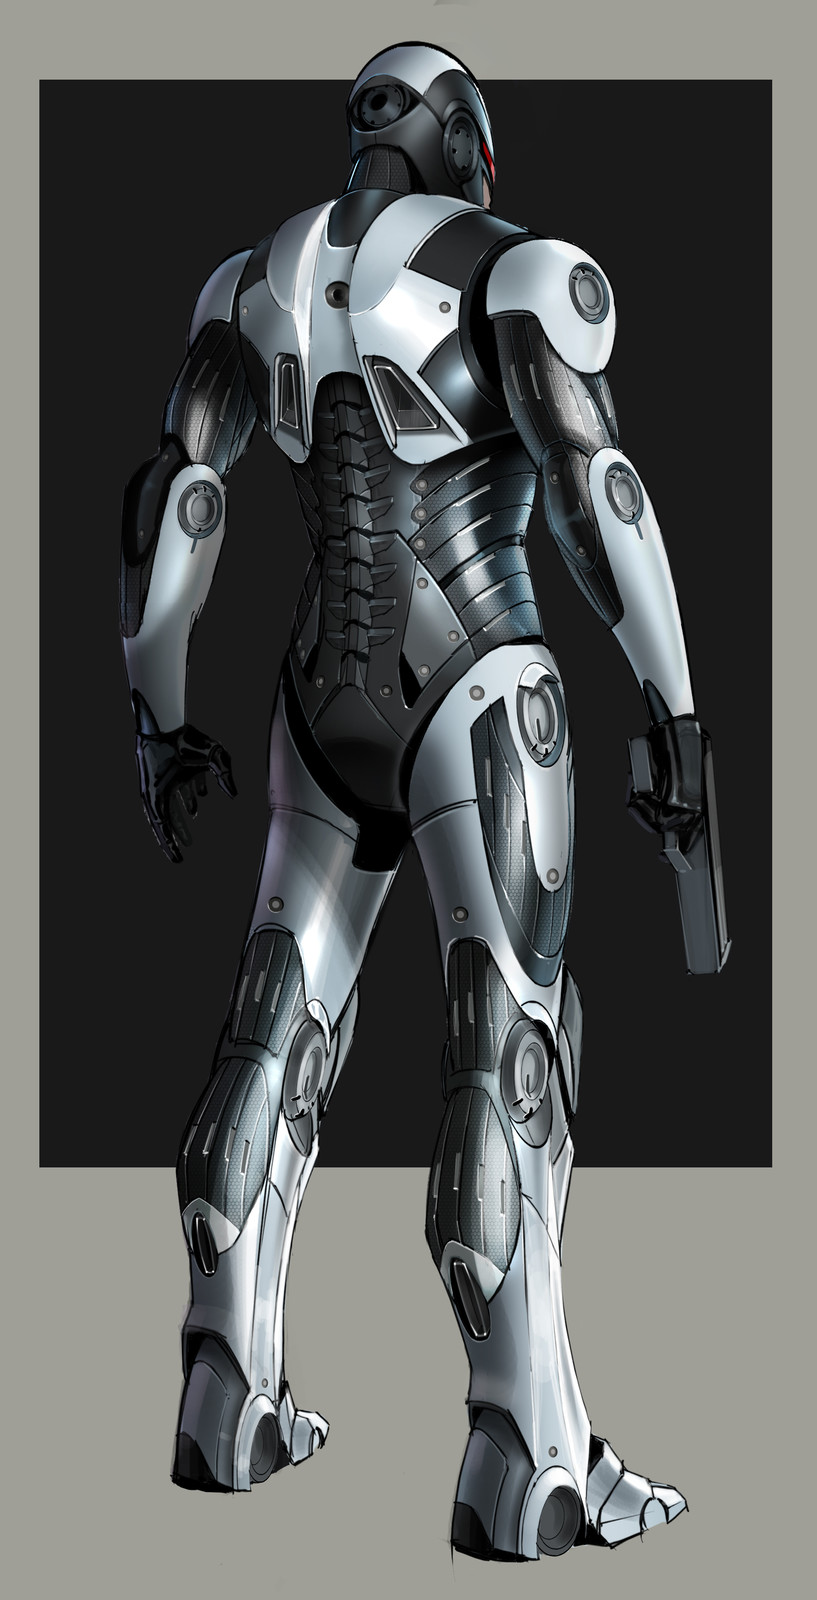 My first (very old) attempt at a redesign of Robocop.